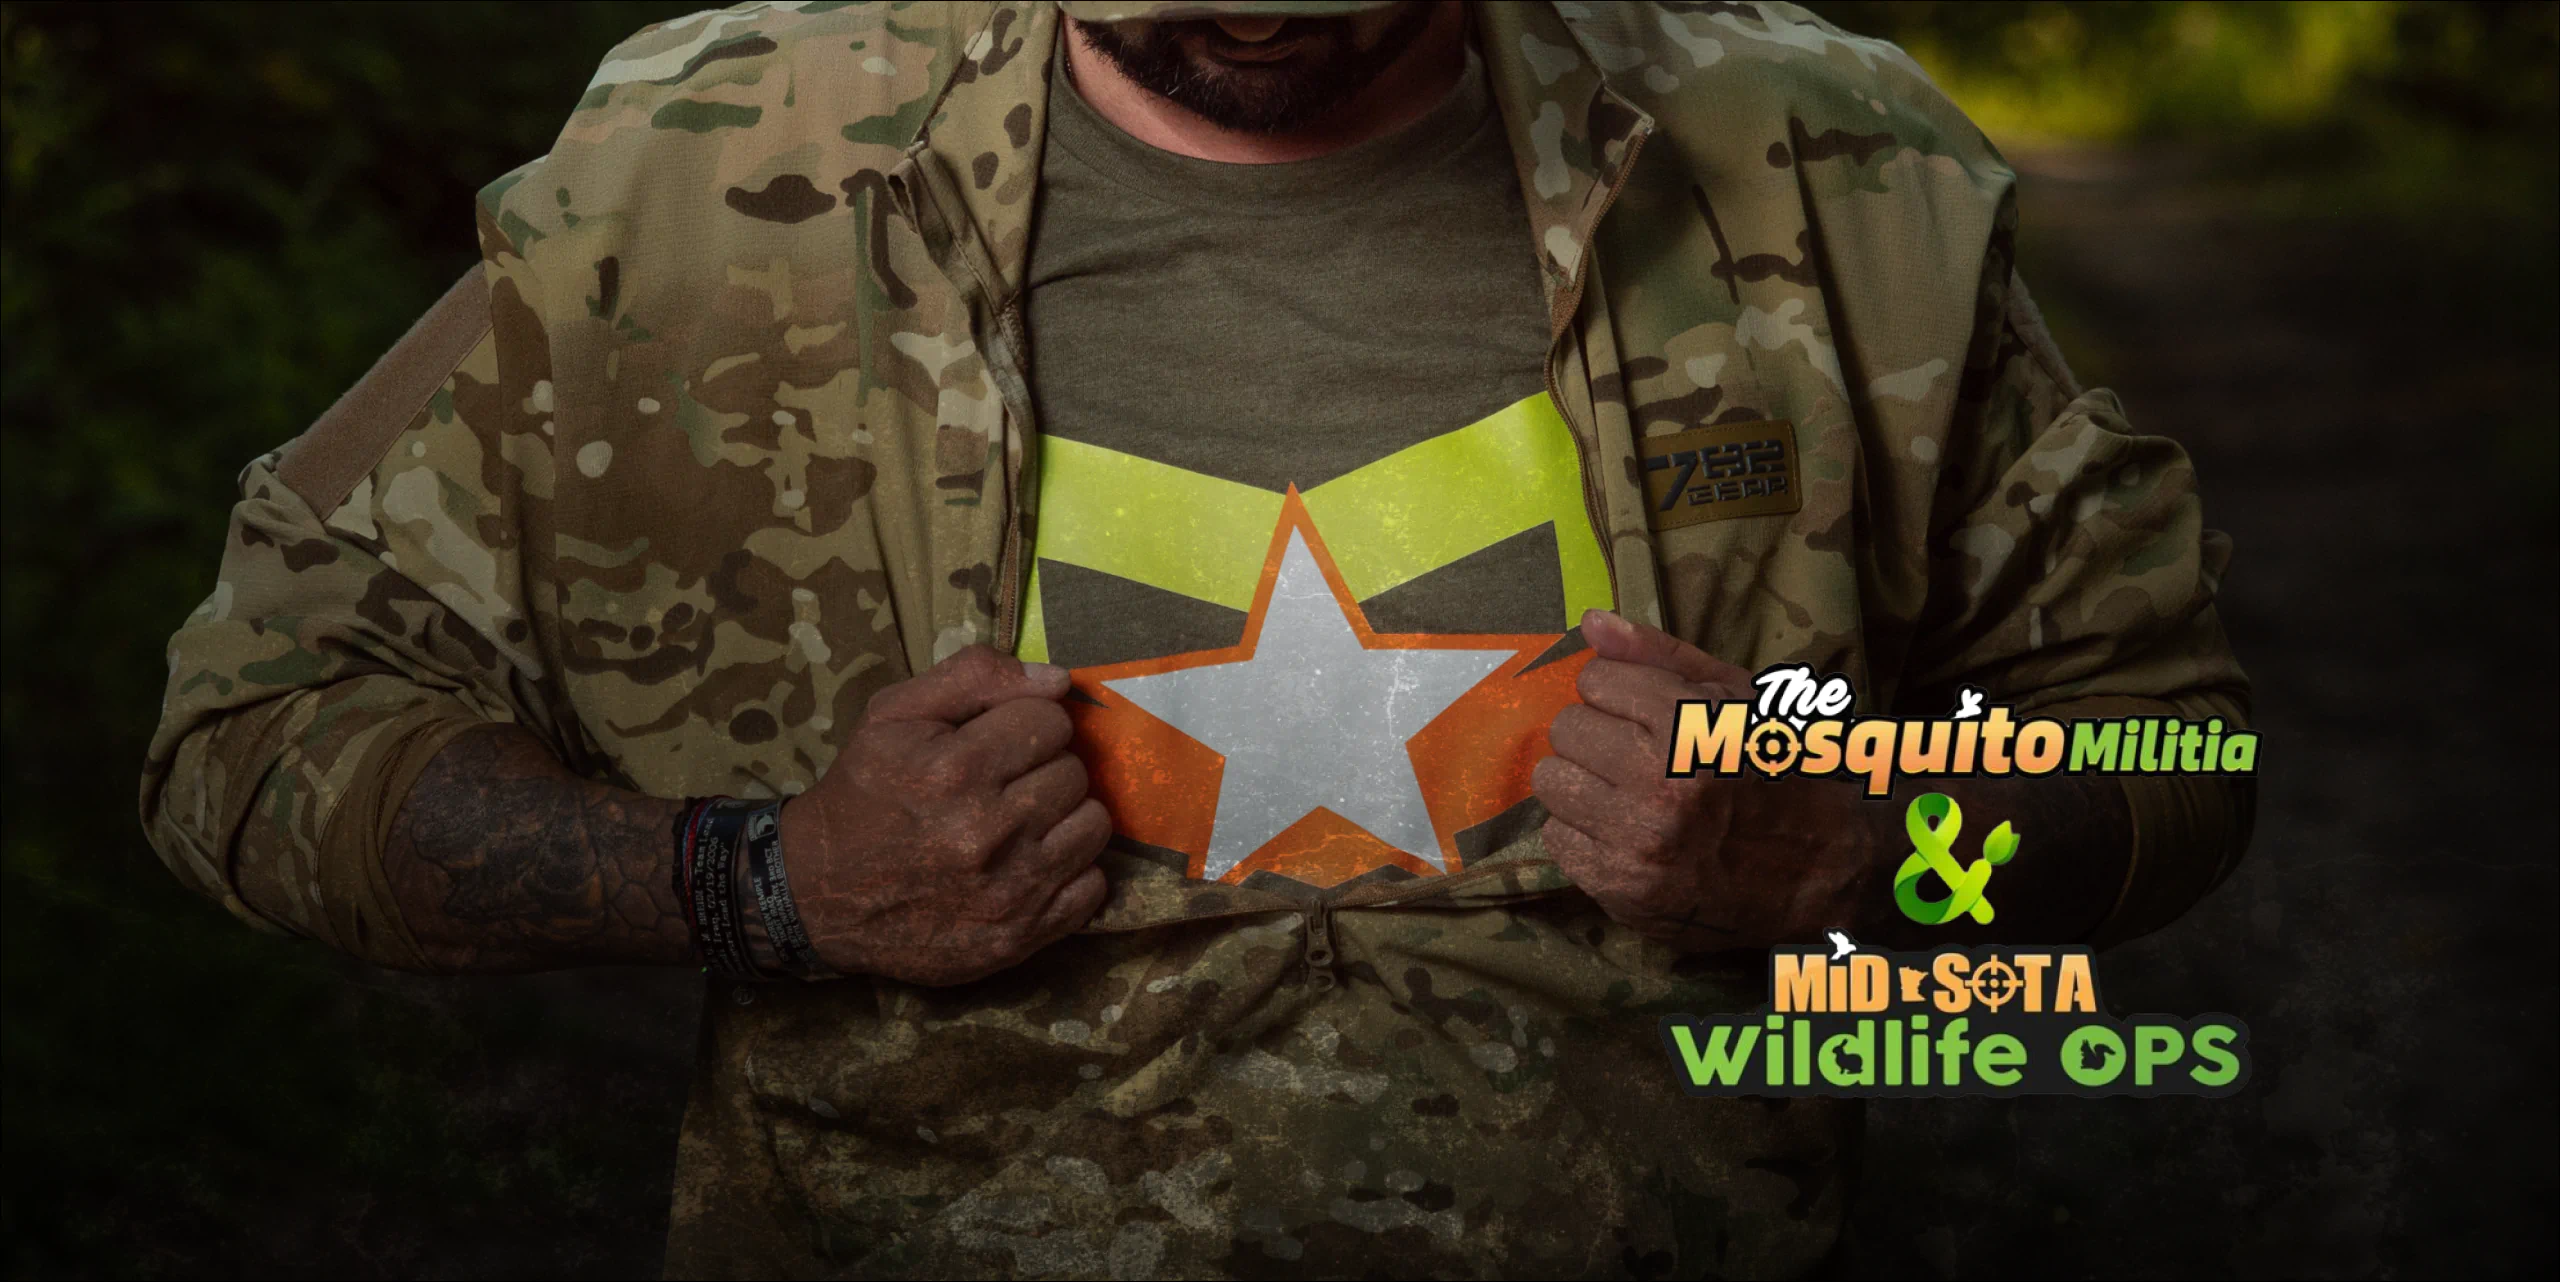 The Mosquito Militia & Mid Sota Wildlife Ops worker showing his shirt 2